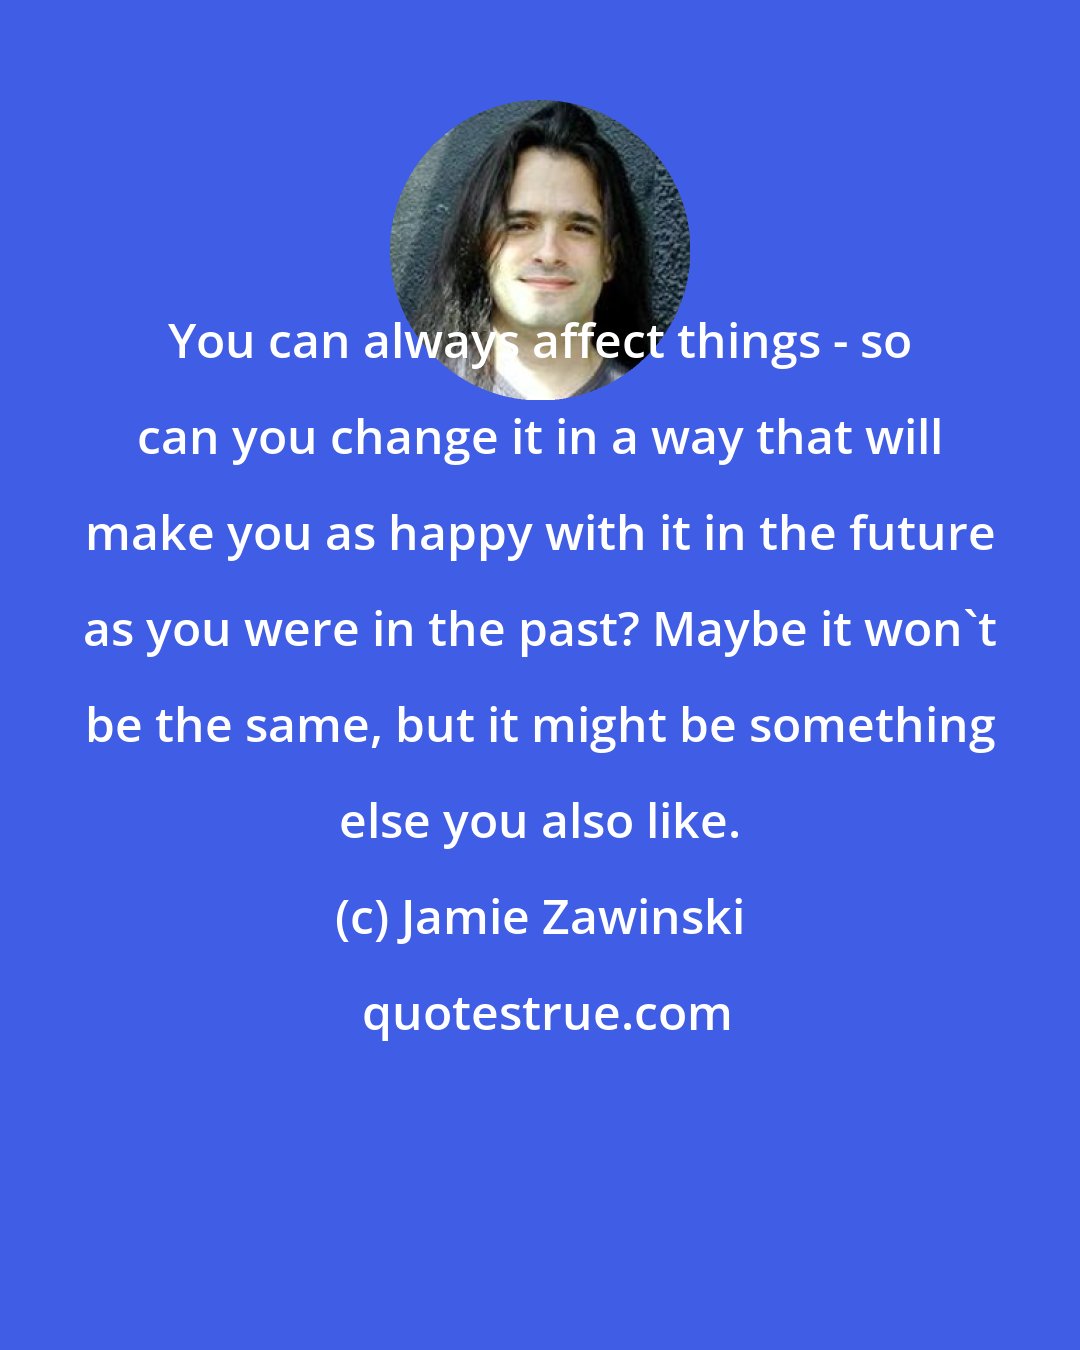 Jamie Zawinski: You can always affect things - so can you change it in a way that will make you as happy with it in the future as you were in the past? Maybe it won't be the same, but it might be something else you also like.